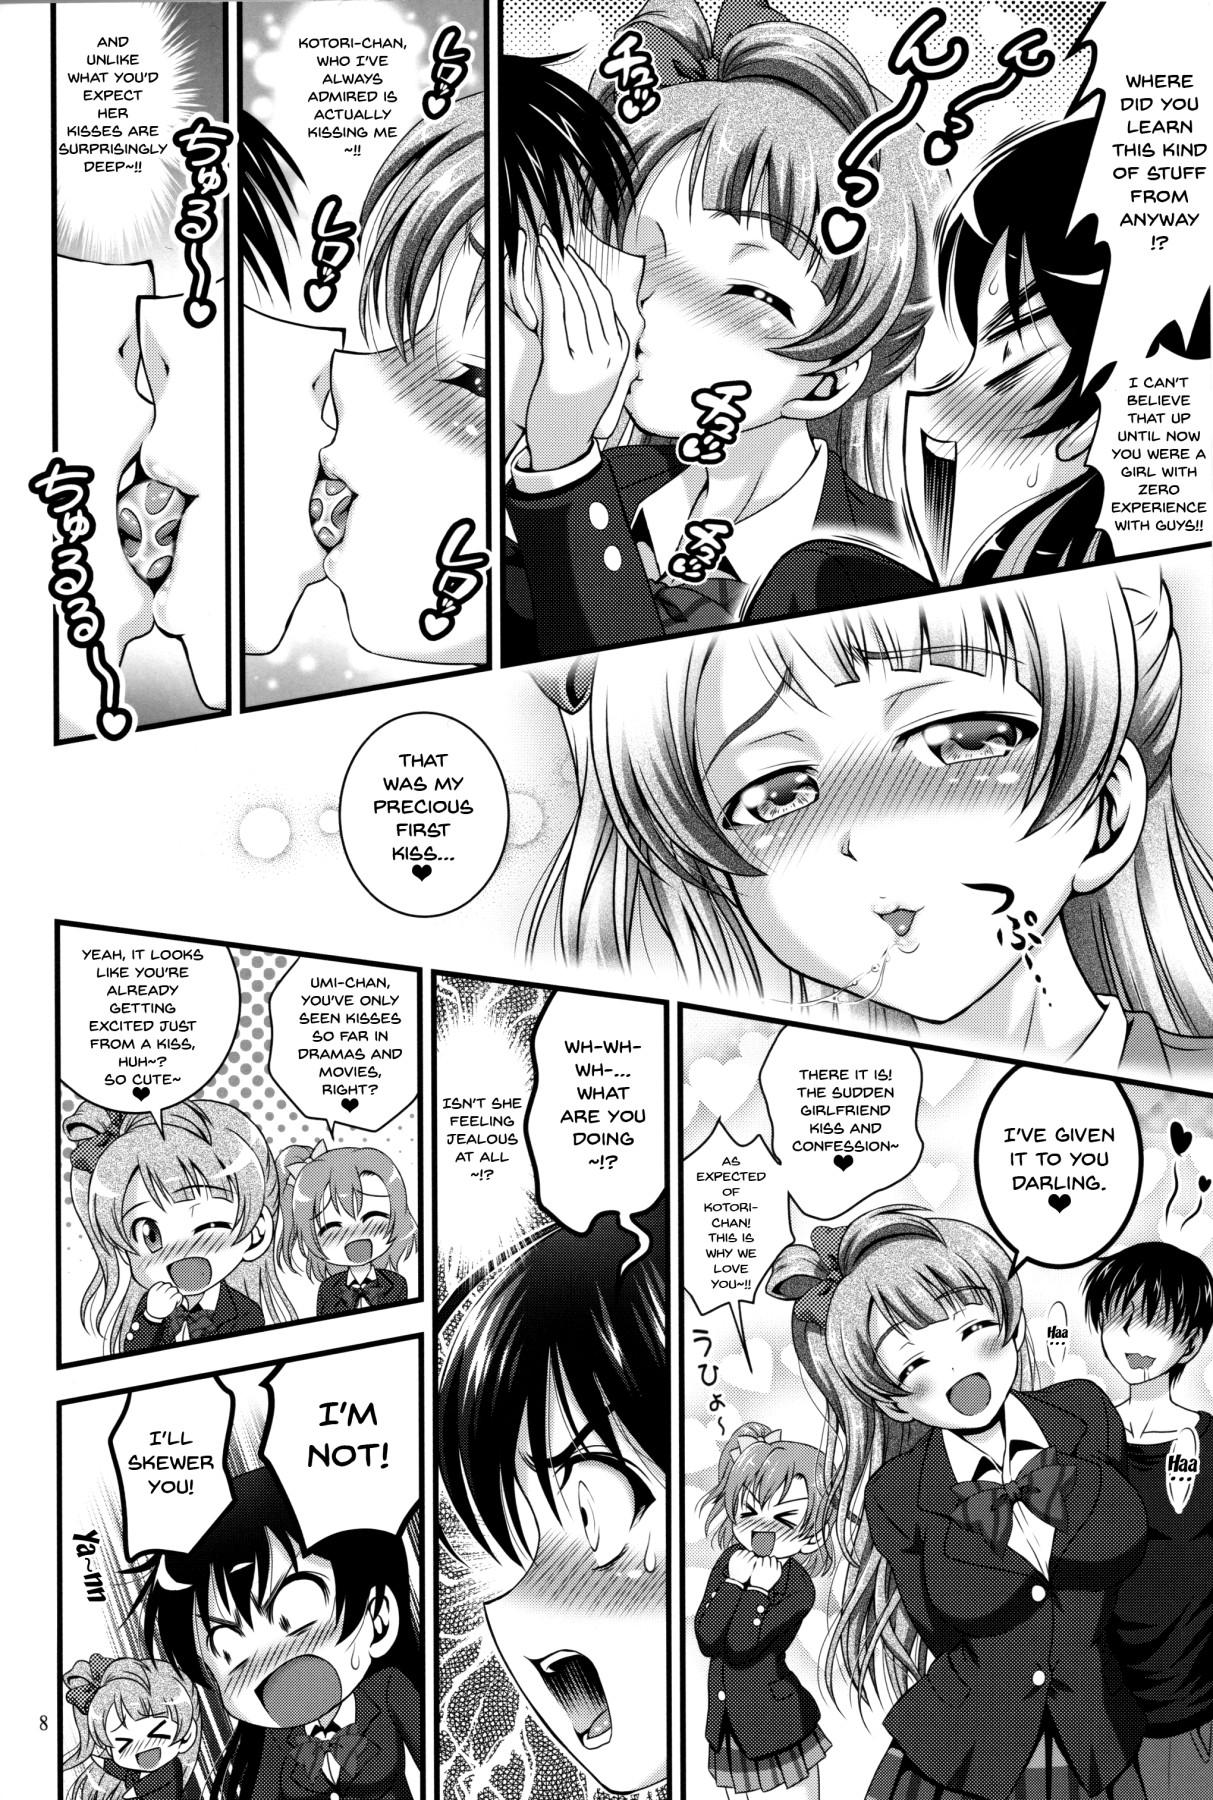 Weird Ore Yome Saimin 4 | My Wife Hypnosis 4 - Love live Exposed - Page 9